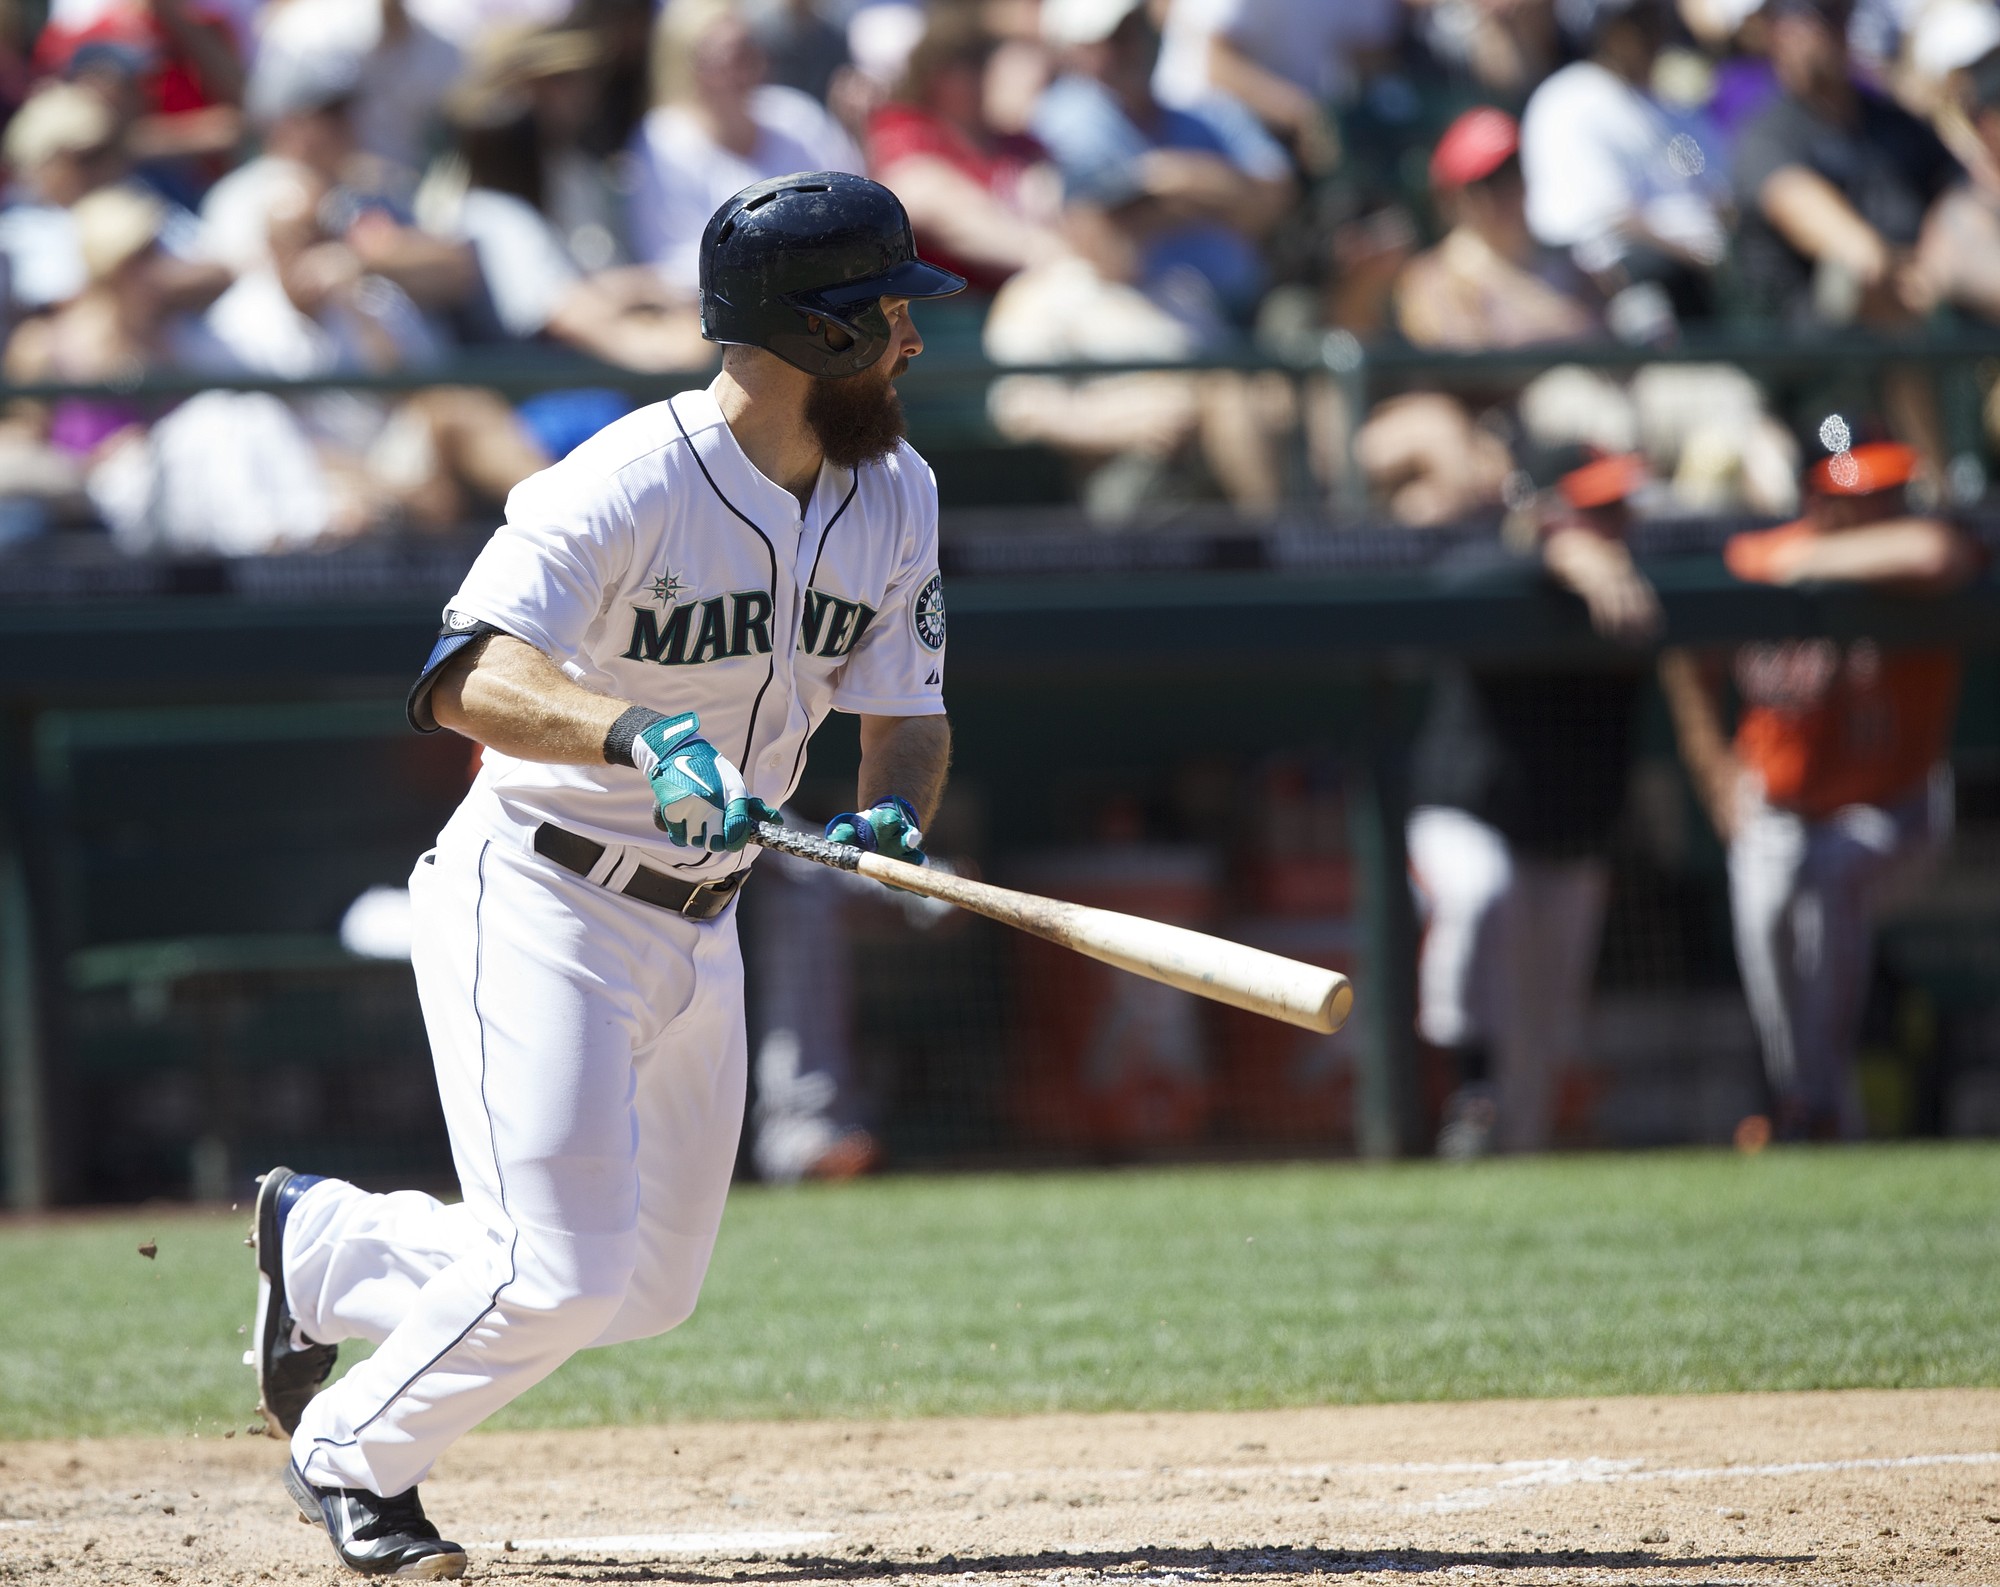 Seattle Mariners' Dustin Ackley runs to first as he hits a double in the fifth inning Saturday against the Baltimore Orioles.